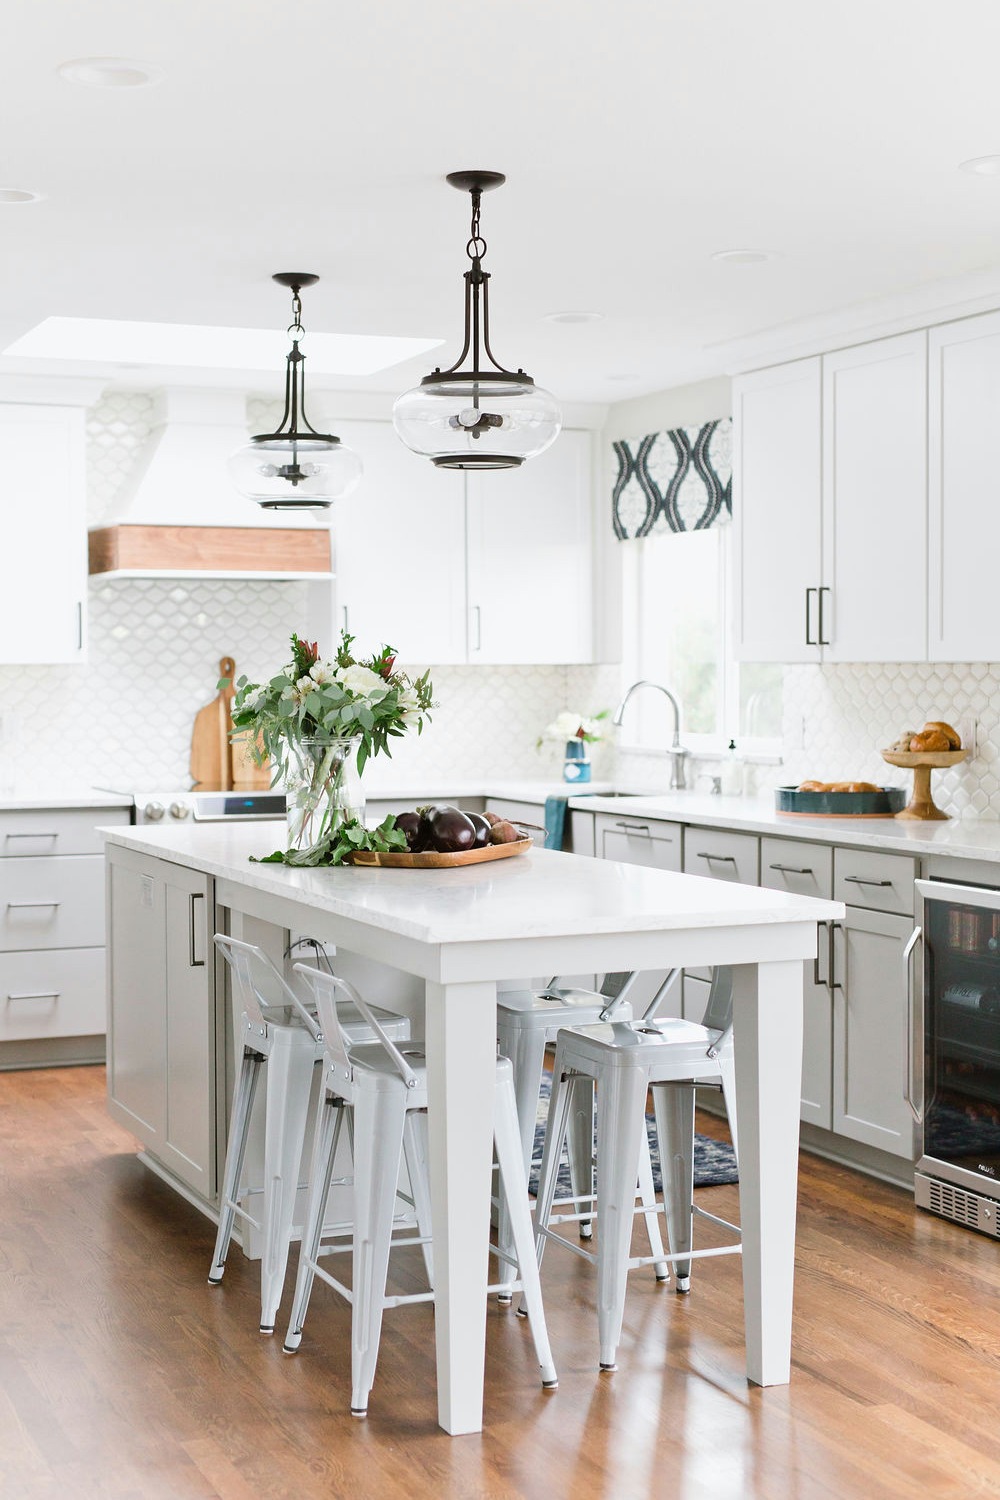 Most Popular Color White Kitchen Cabinetry Small Kitchen All White Look White Cabinets Sleek